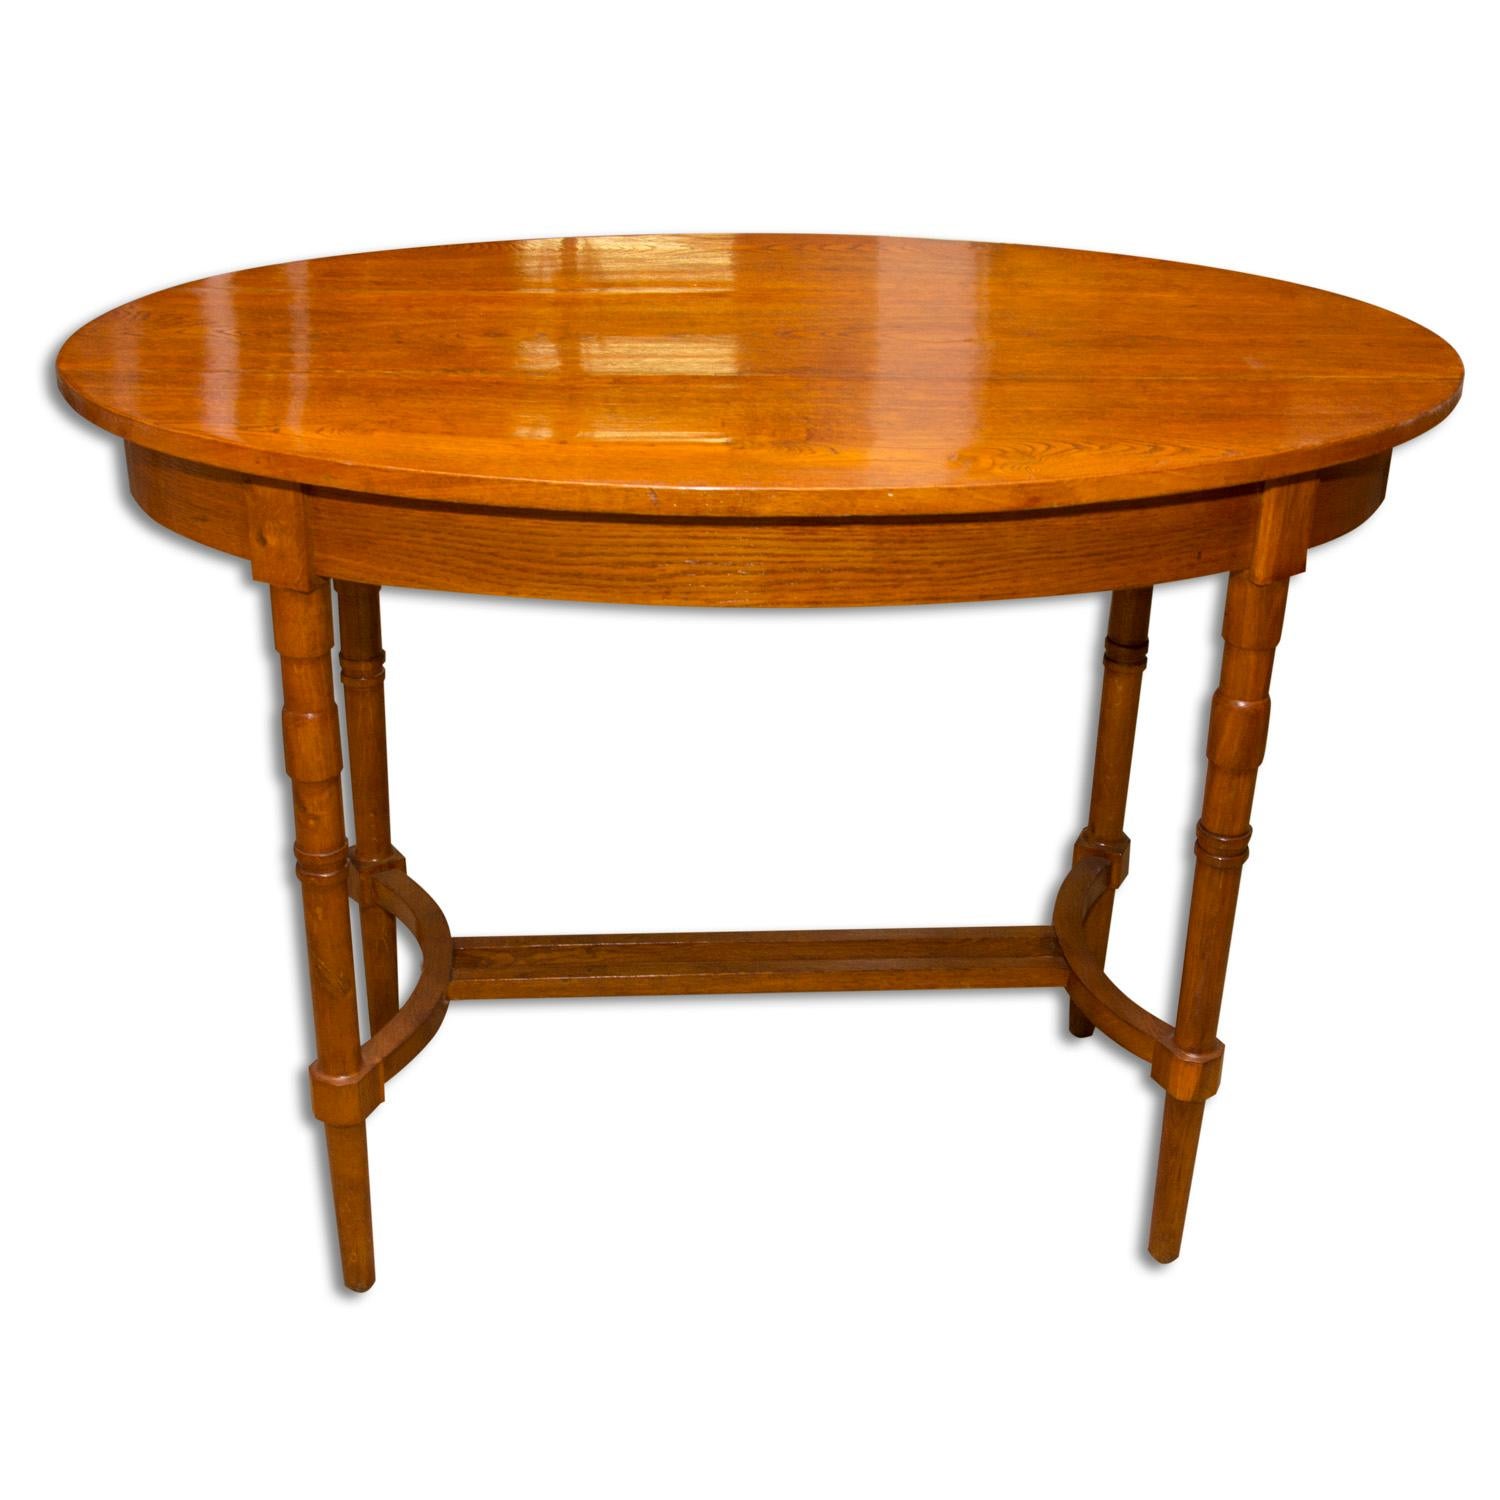 Art Nouveau Early 20th Century Secessionist Oak Occasional Table, Austria-Hungary For Sale